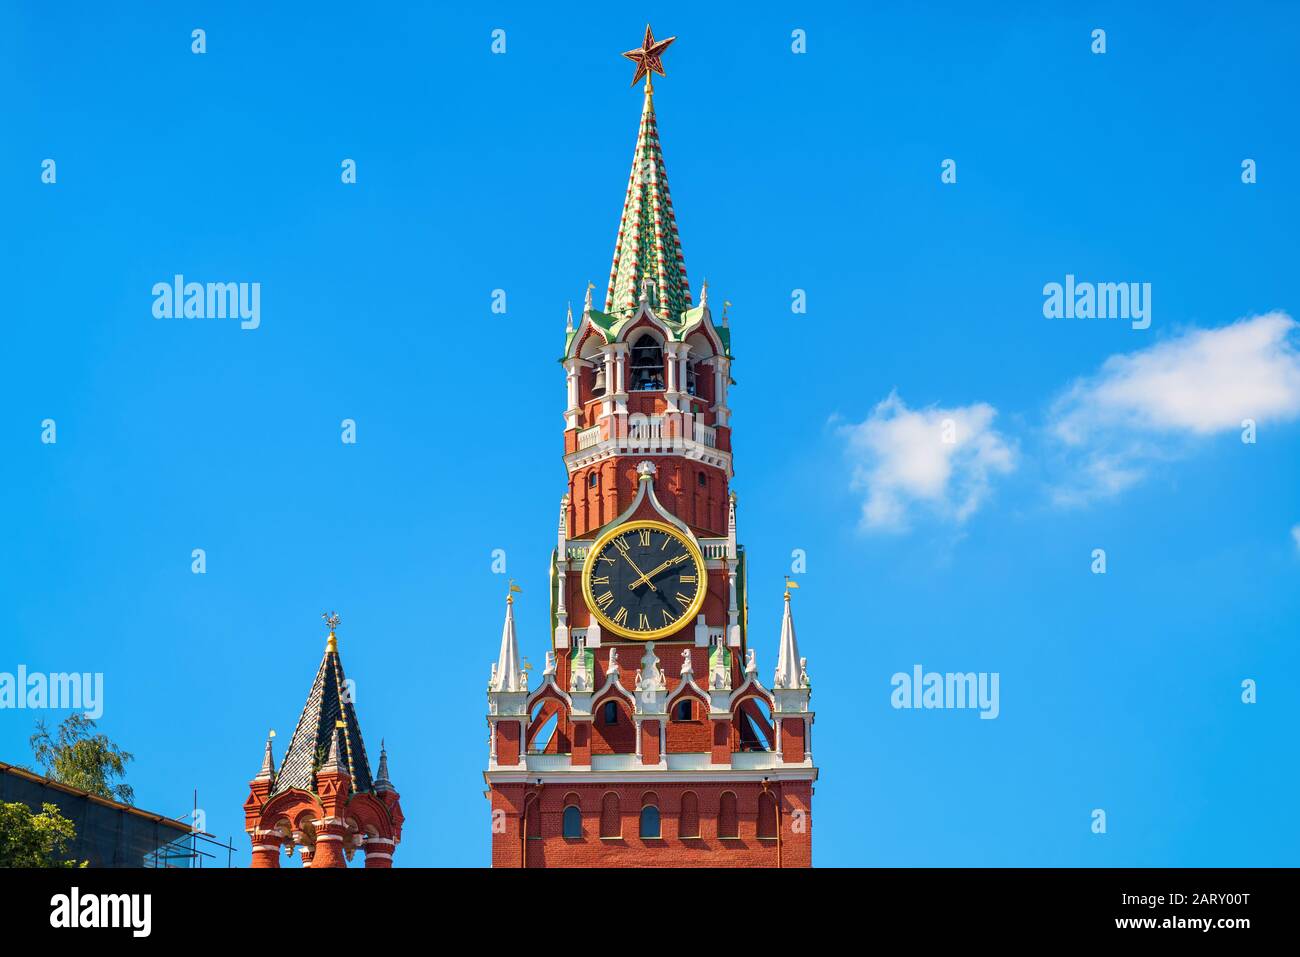 The famous Spasskaya tower of Moscow Kremlin, Russia. The Moscow Kremlin is the residence of the Russian president and the main tourist attraction of Stock Photo